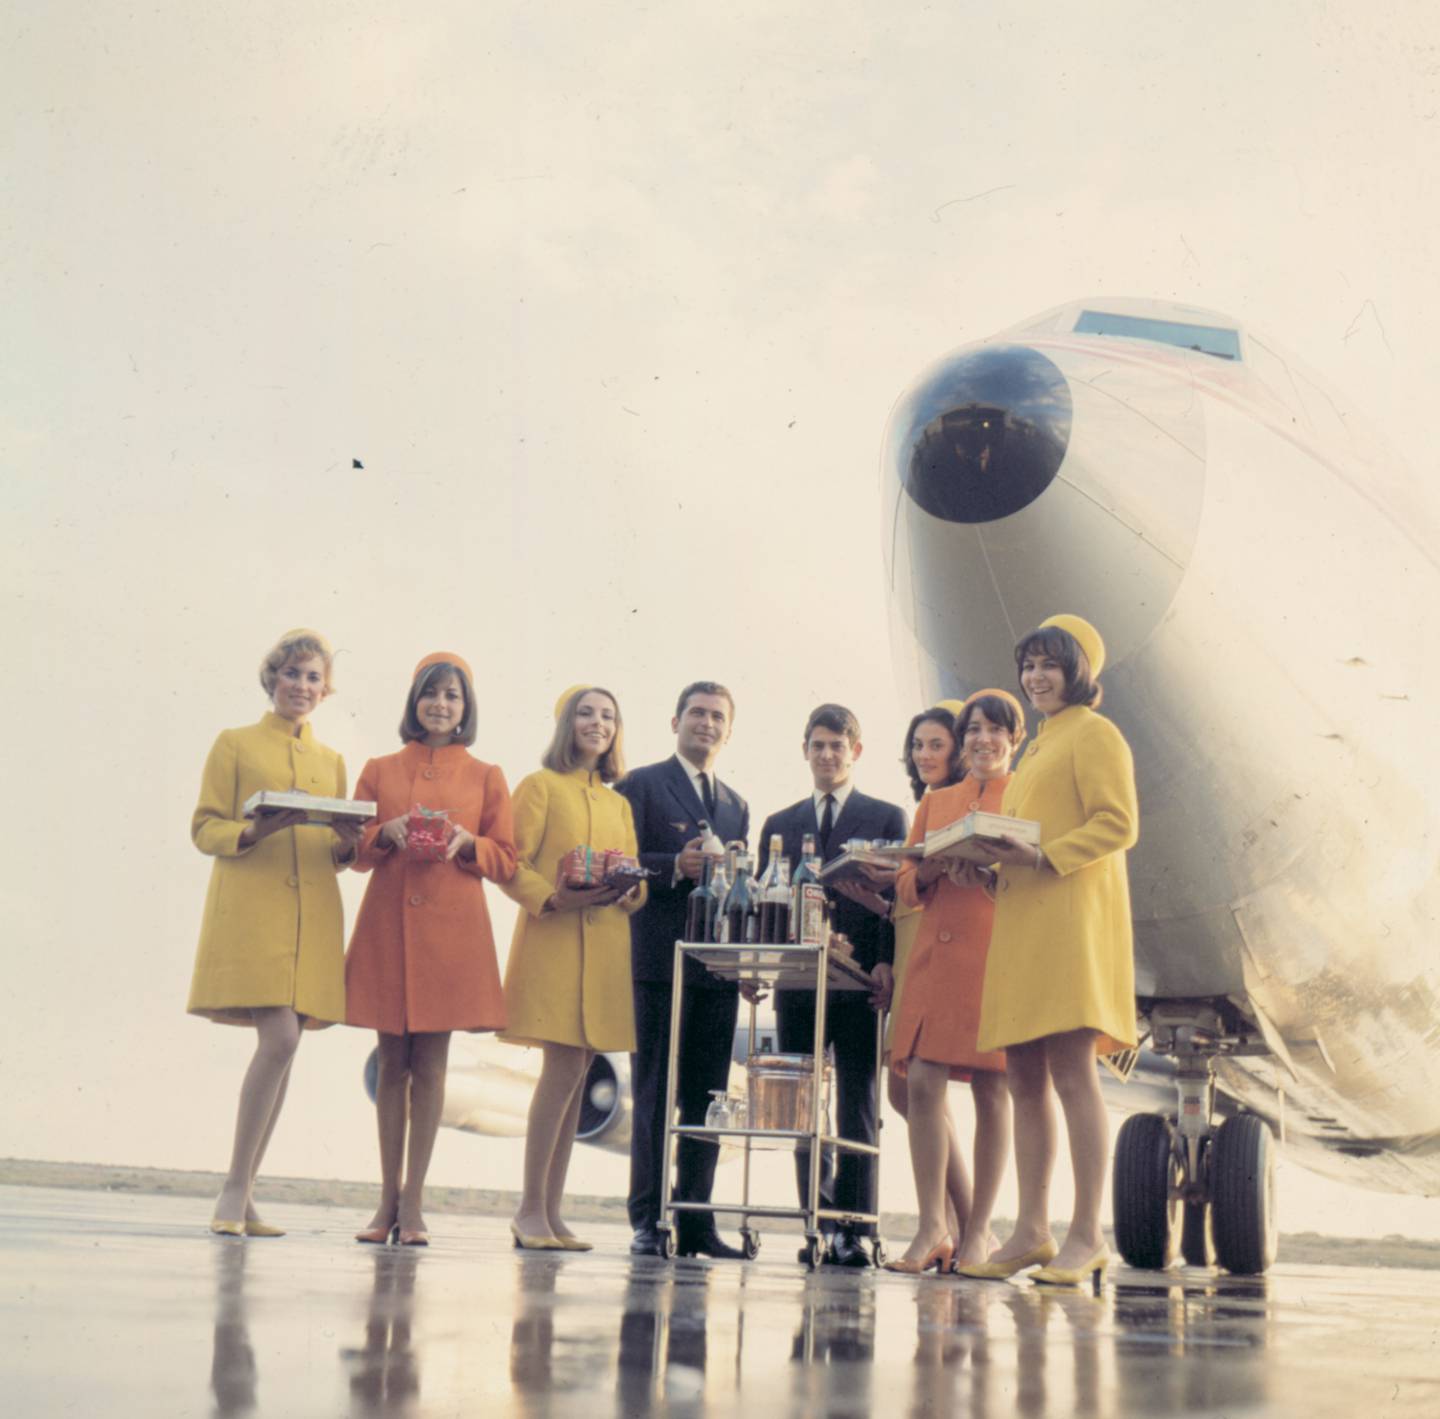 Middle East Airlines cabin crew in front of Boeing 707-300. Photo: Middle East Airlines – Air Liban